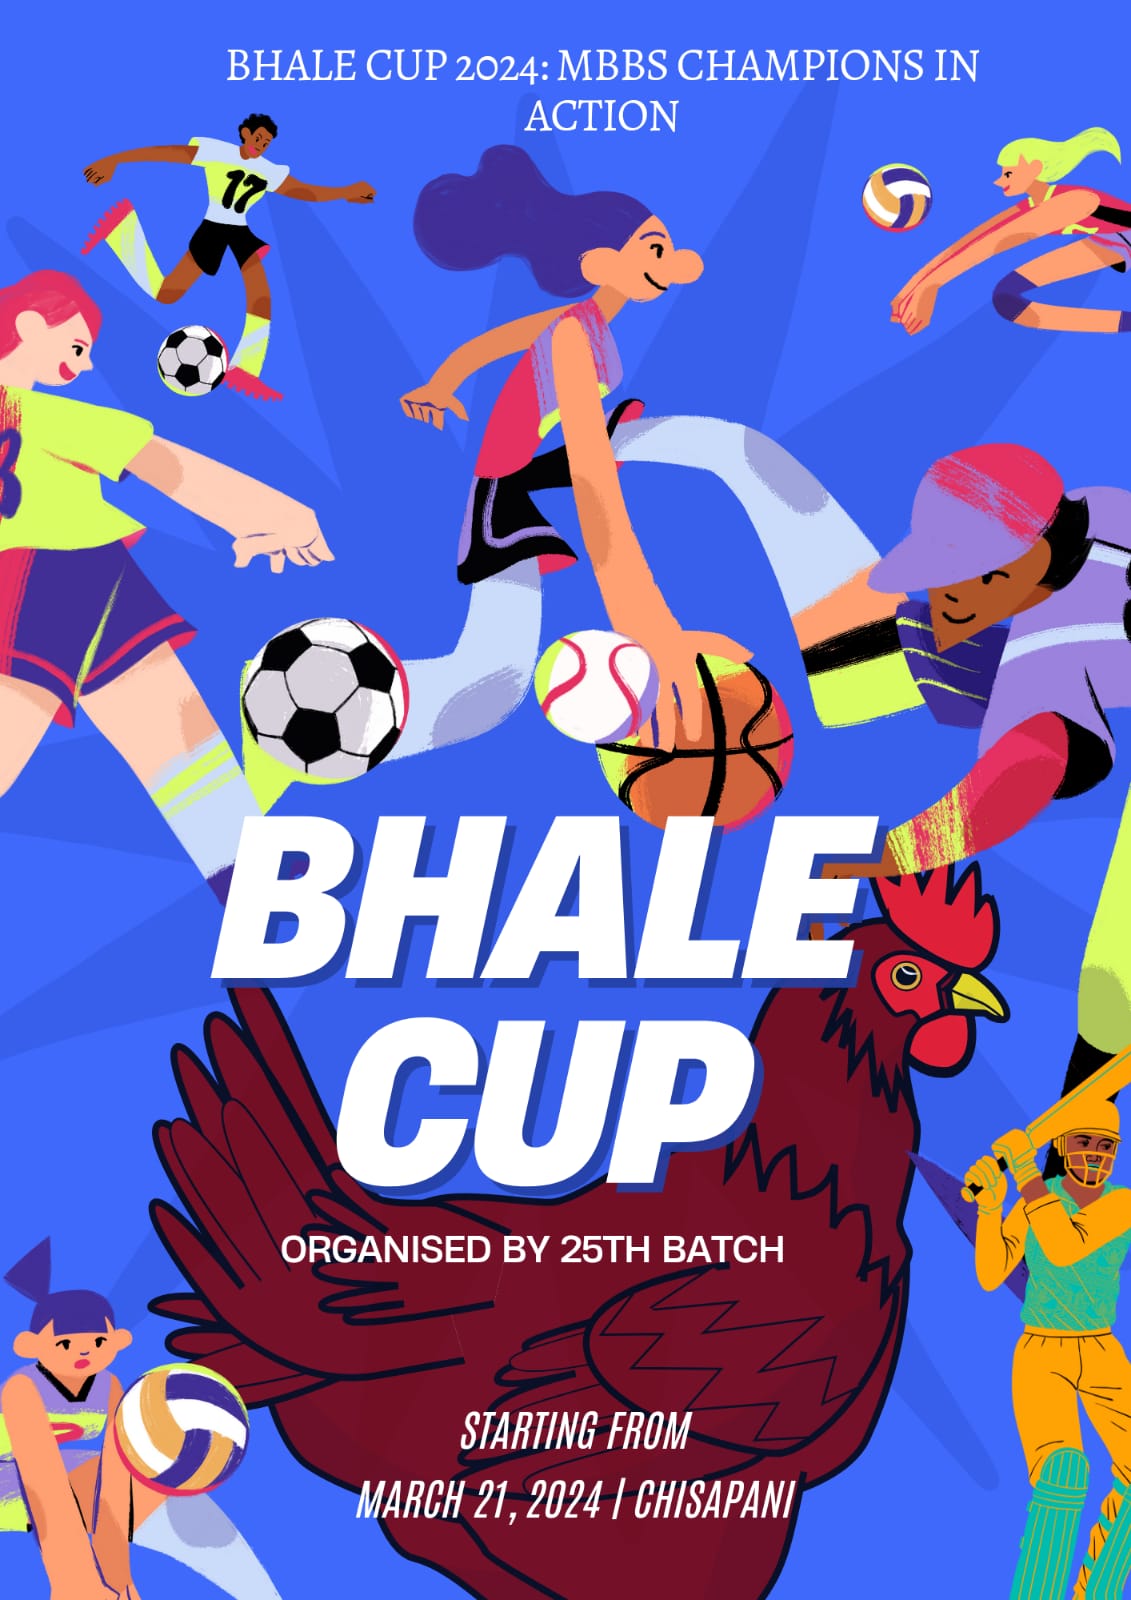 Bhale cup cricket 